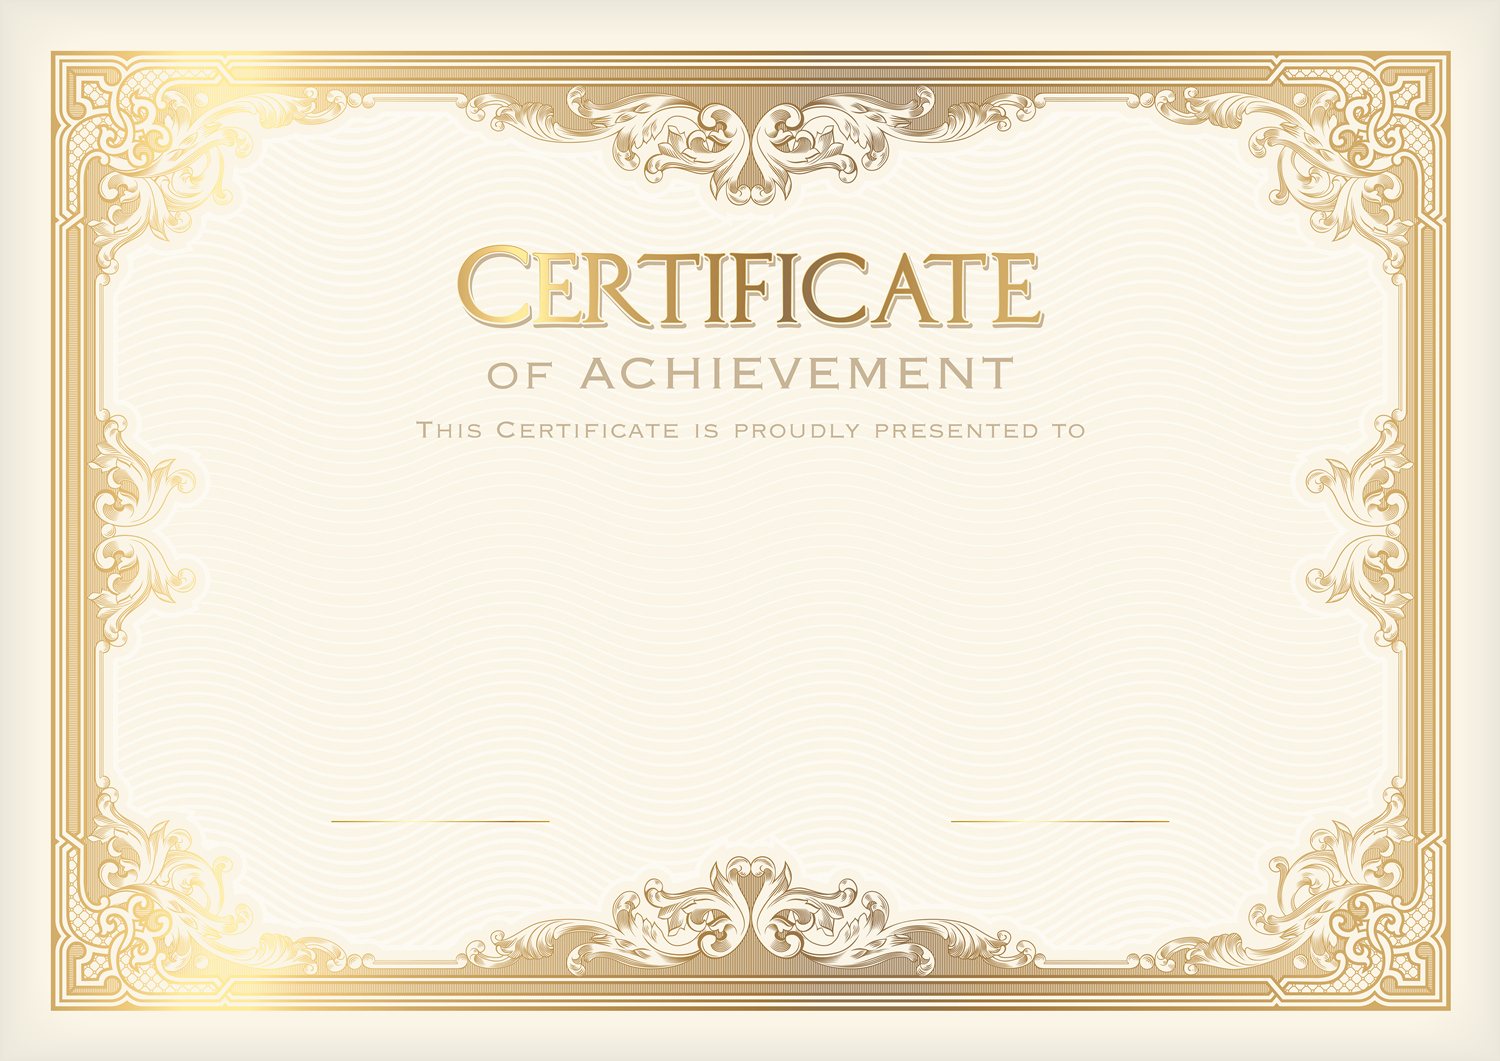 Download PNG image - Certificate PNG Image 